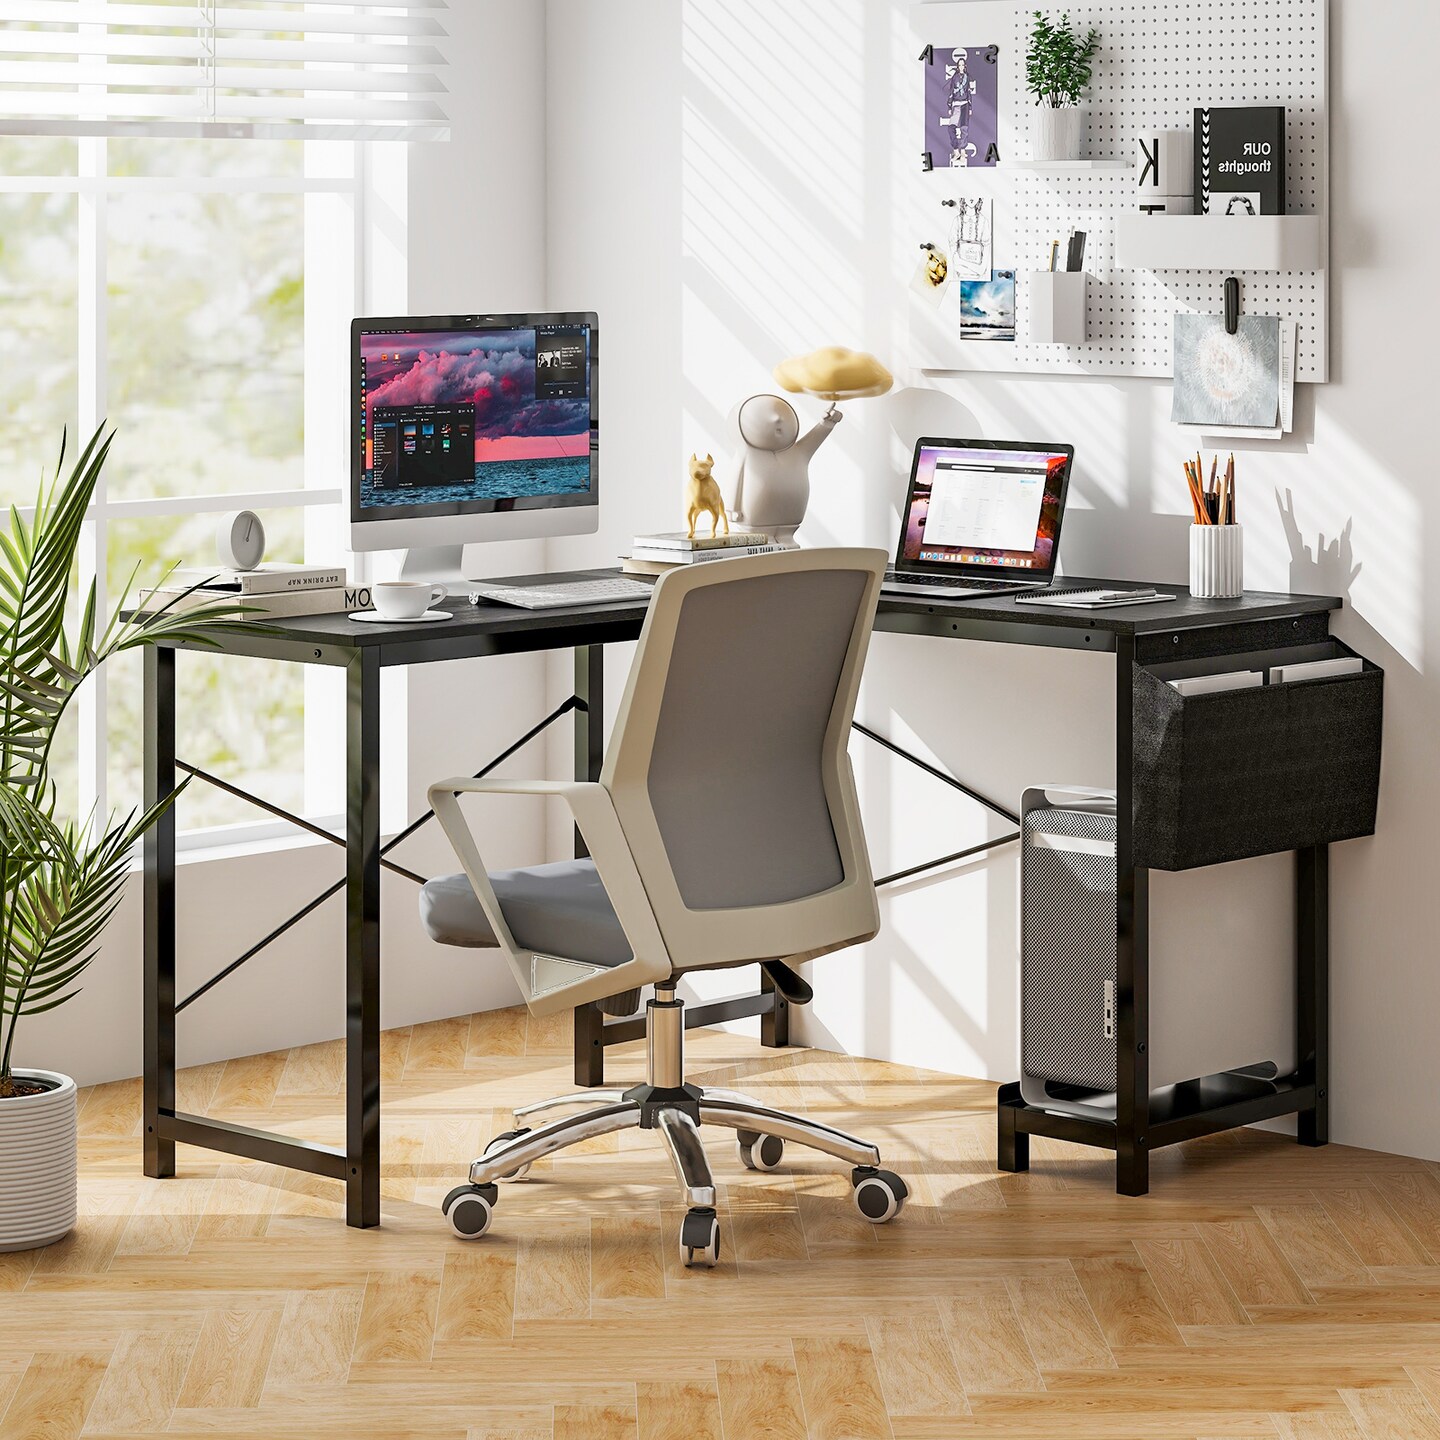 Modern Reversible Computer Desk With Storage Pocket And Cpu Stand For Working Writing Gaming